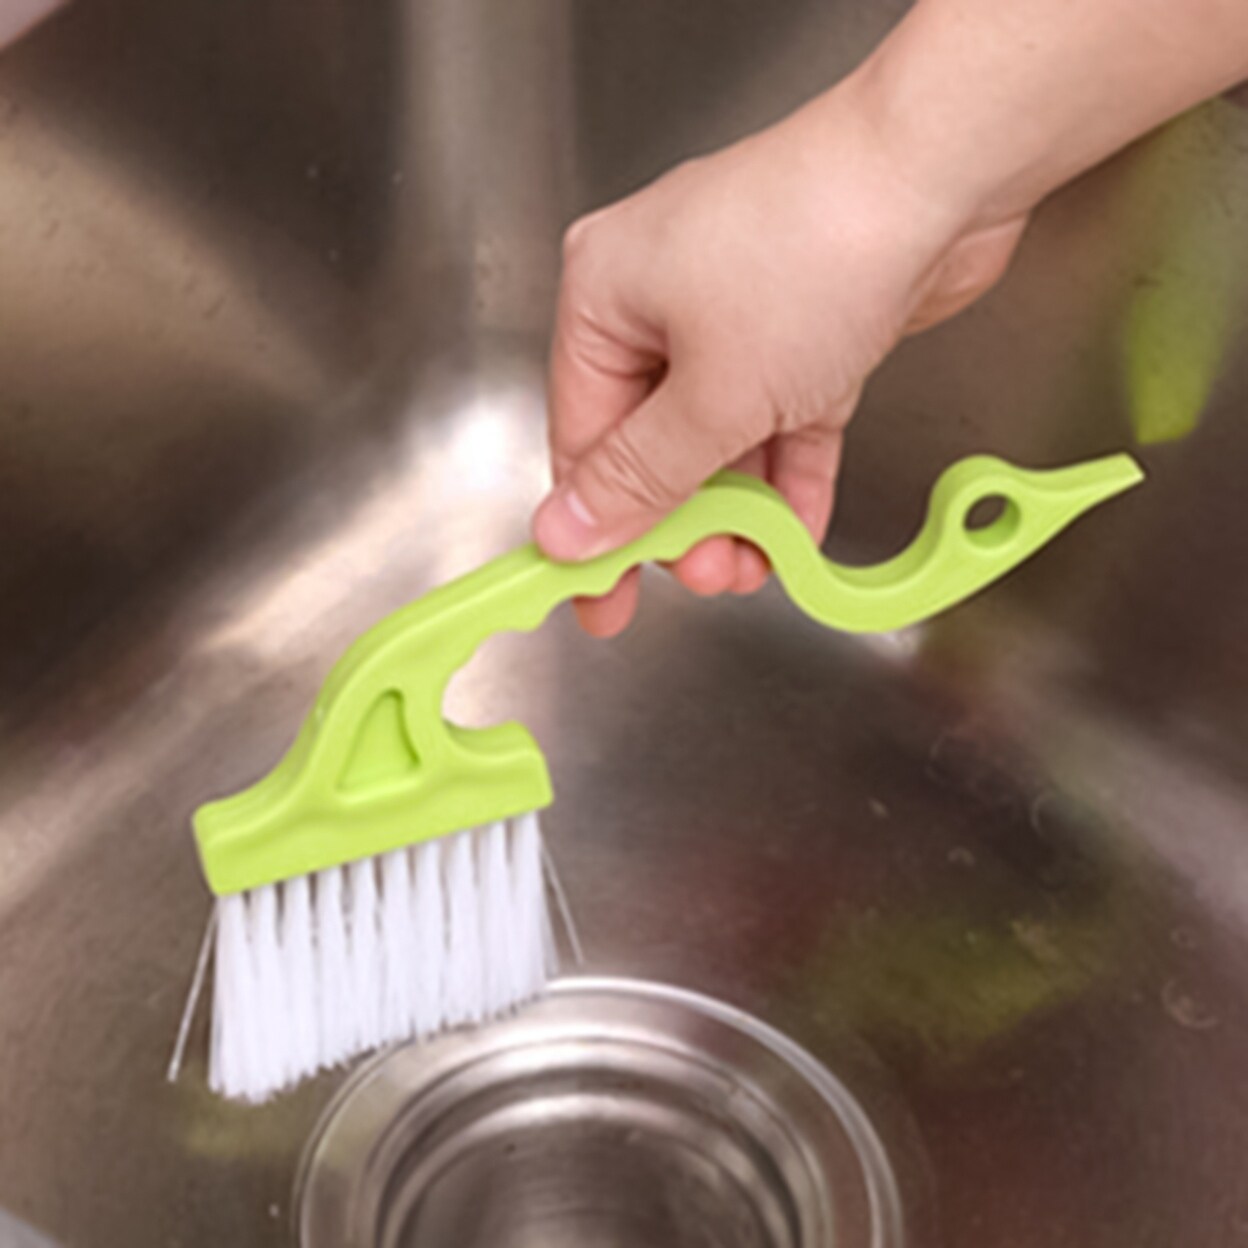 greenhome Groove Gap Cleaning Tools Reliable Safe Plastic Hand